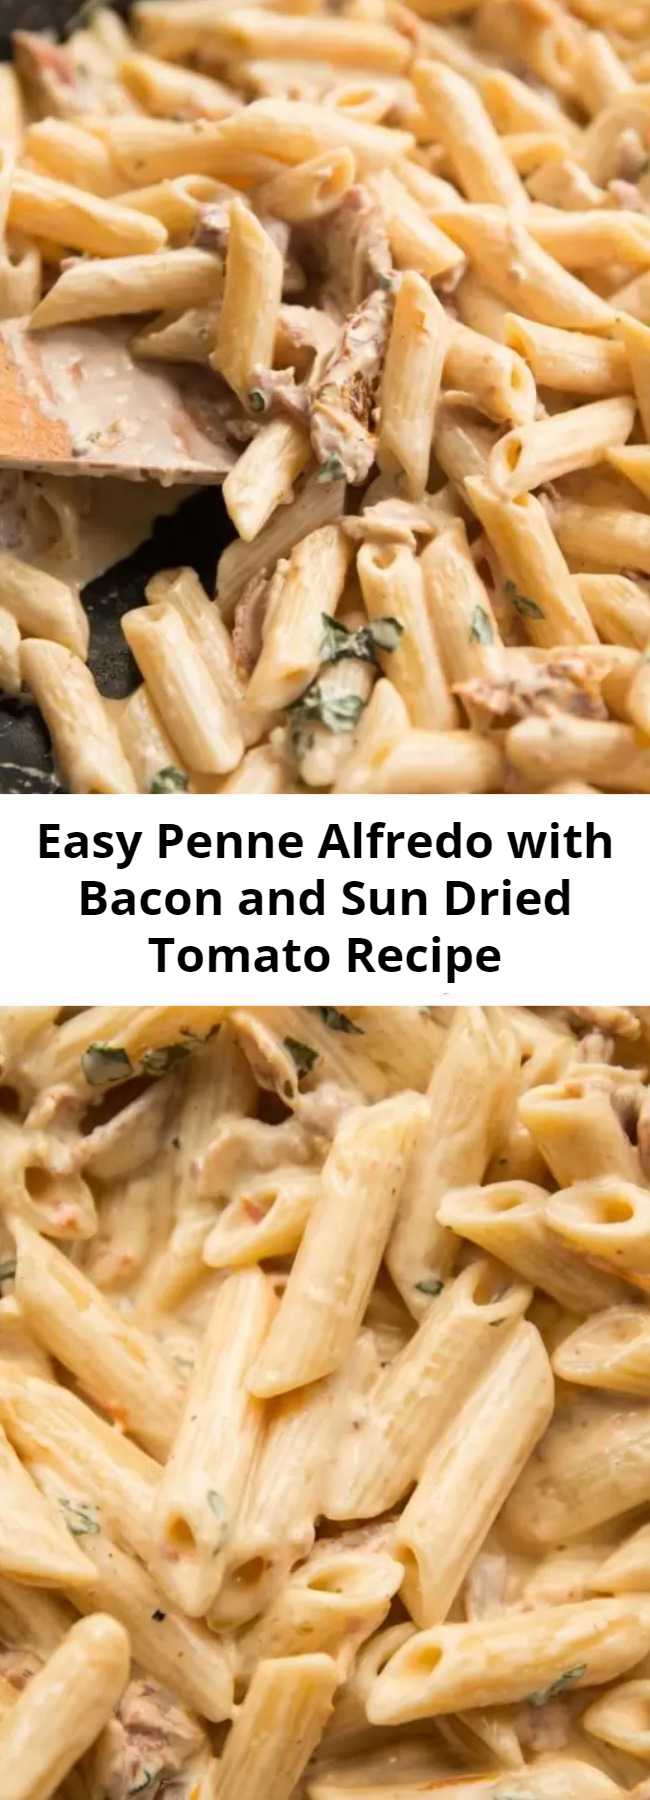 Easy Penne Alfredo with Bacon and Sun Dried Tomato Recipe - A delicious twist on the classic Alfredo. Penne Alfredo with Bacon and Sun Dried Tomato will change your 'go to' quick dinner forever. #bacon #penne #alfredo #pennealfredo #pasta #creamypasta